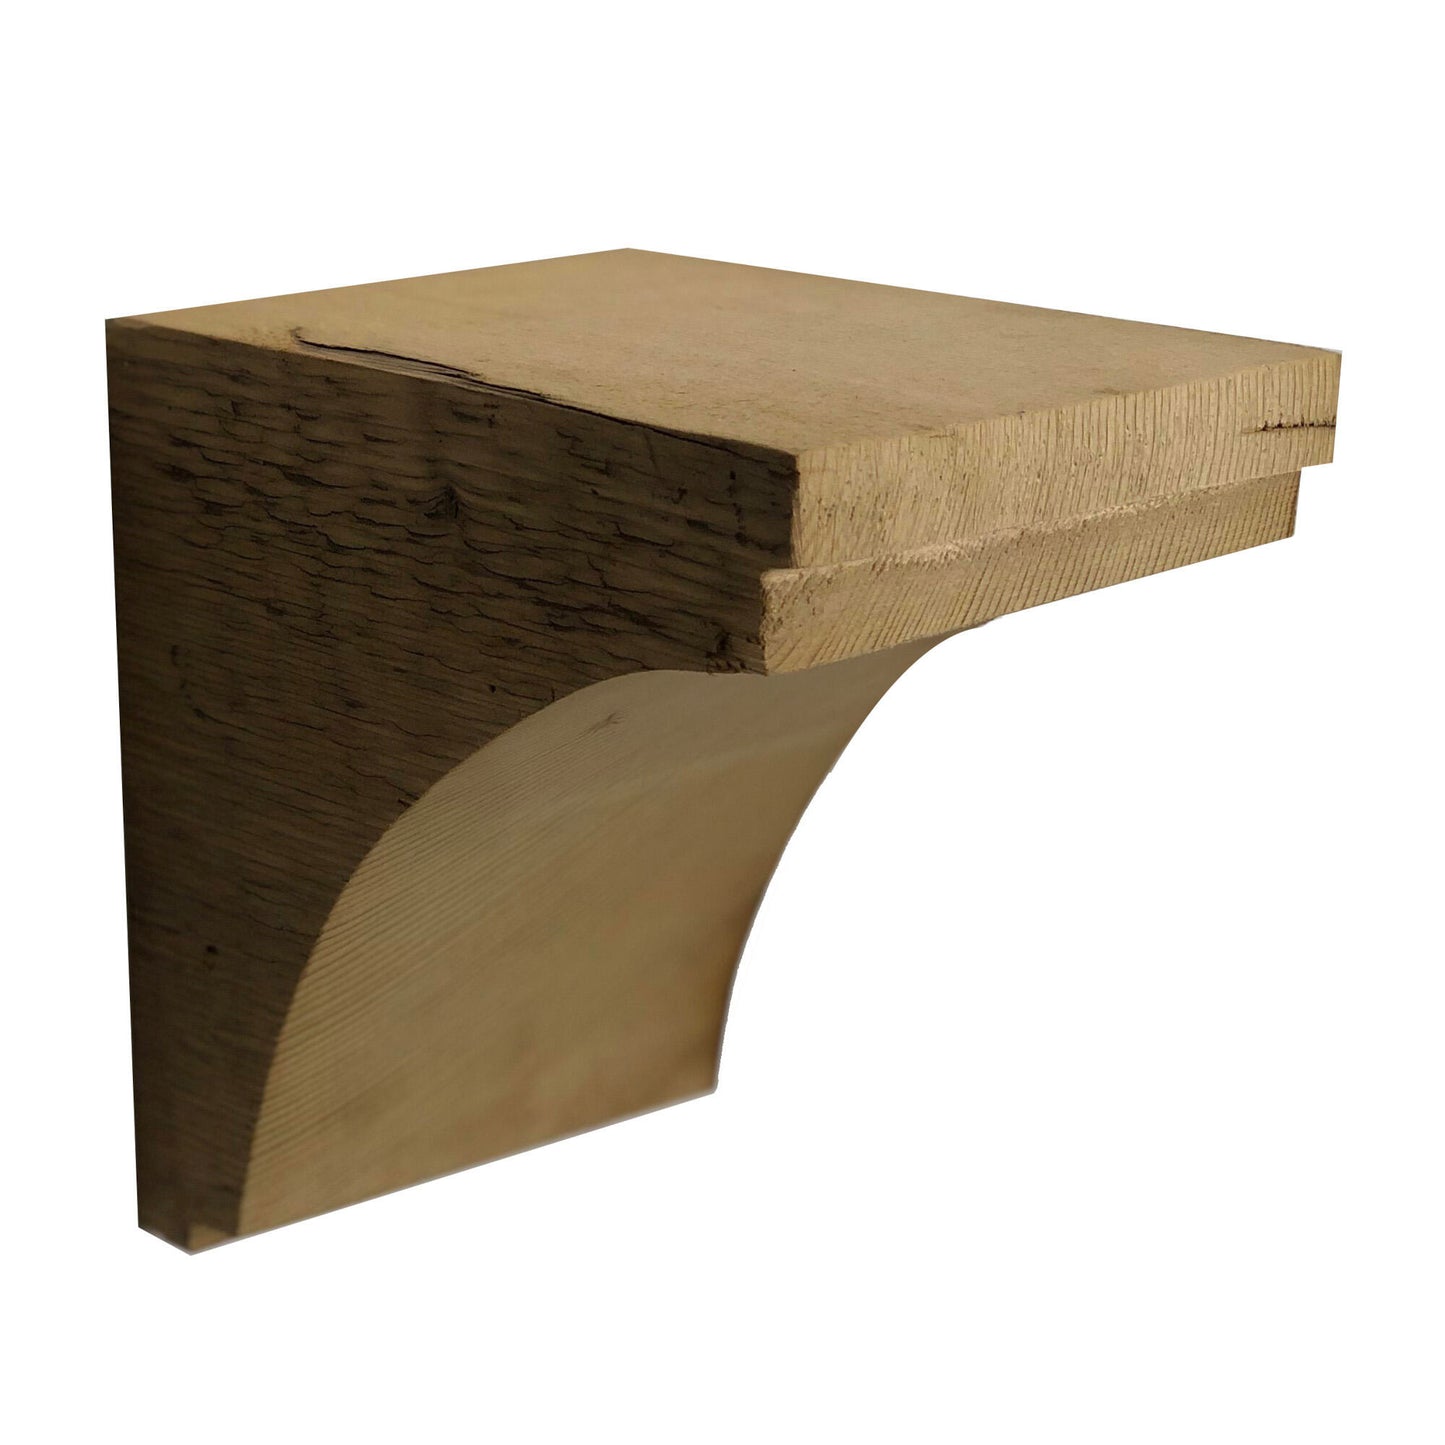 decorative corbel made from reclaimed barnwood. Wood grain displayed on the side and corbel shown in a decorative profile. There is one small step at the top of the corbel before the arch and another small step at the bottom.